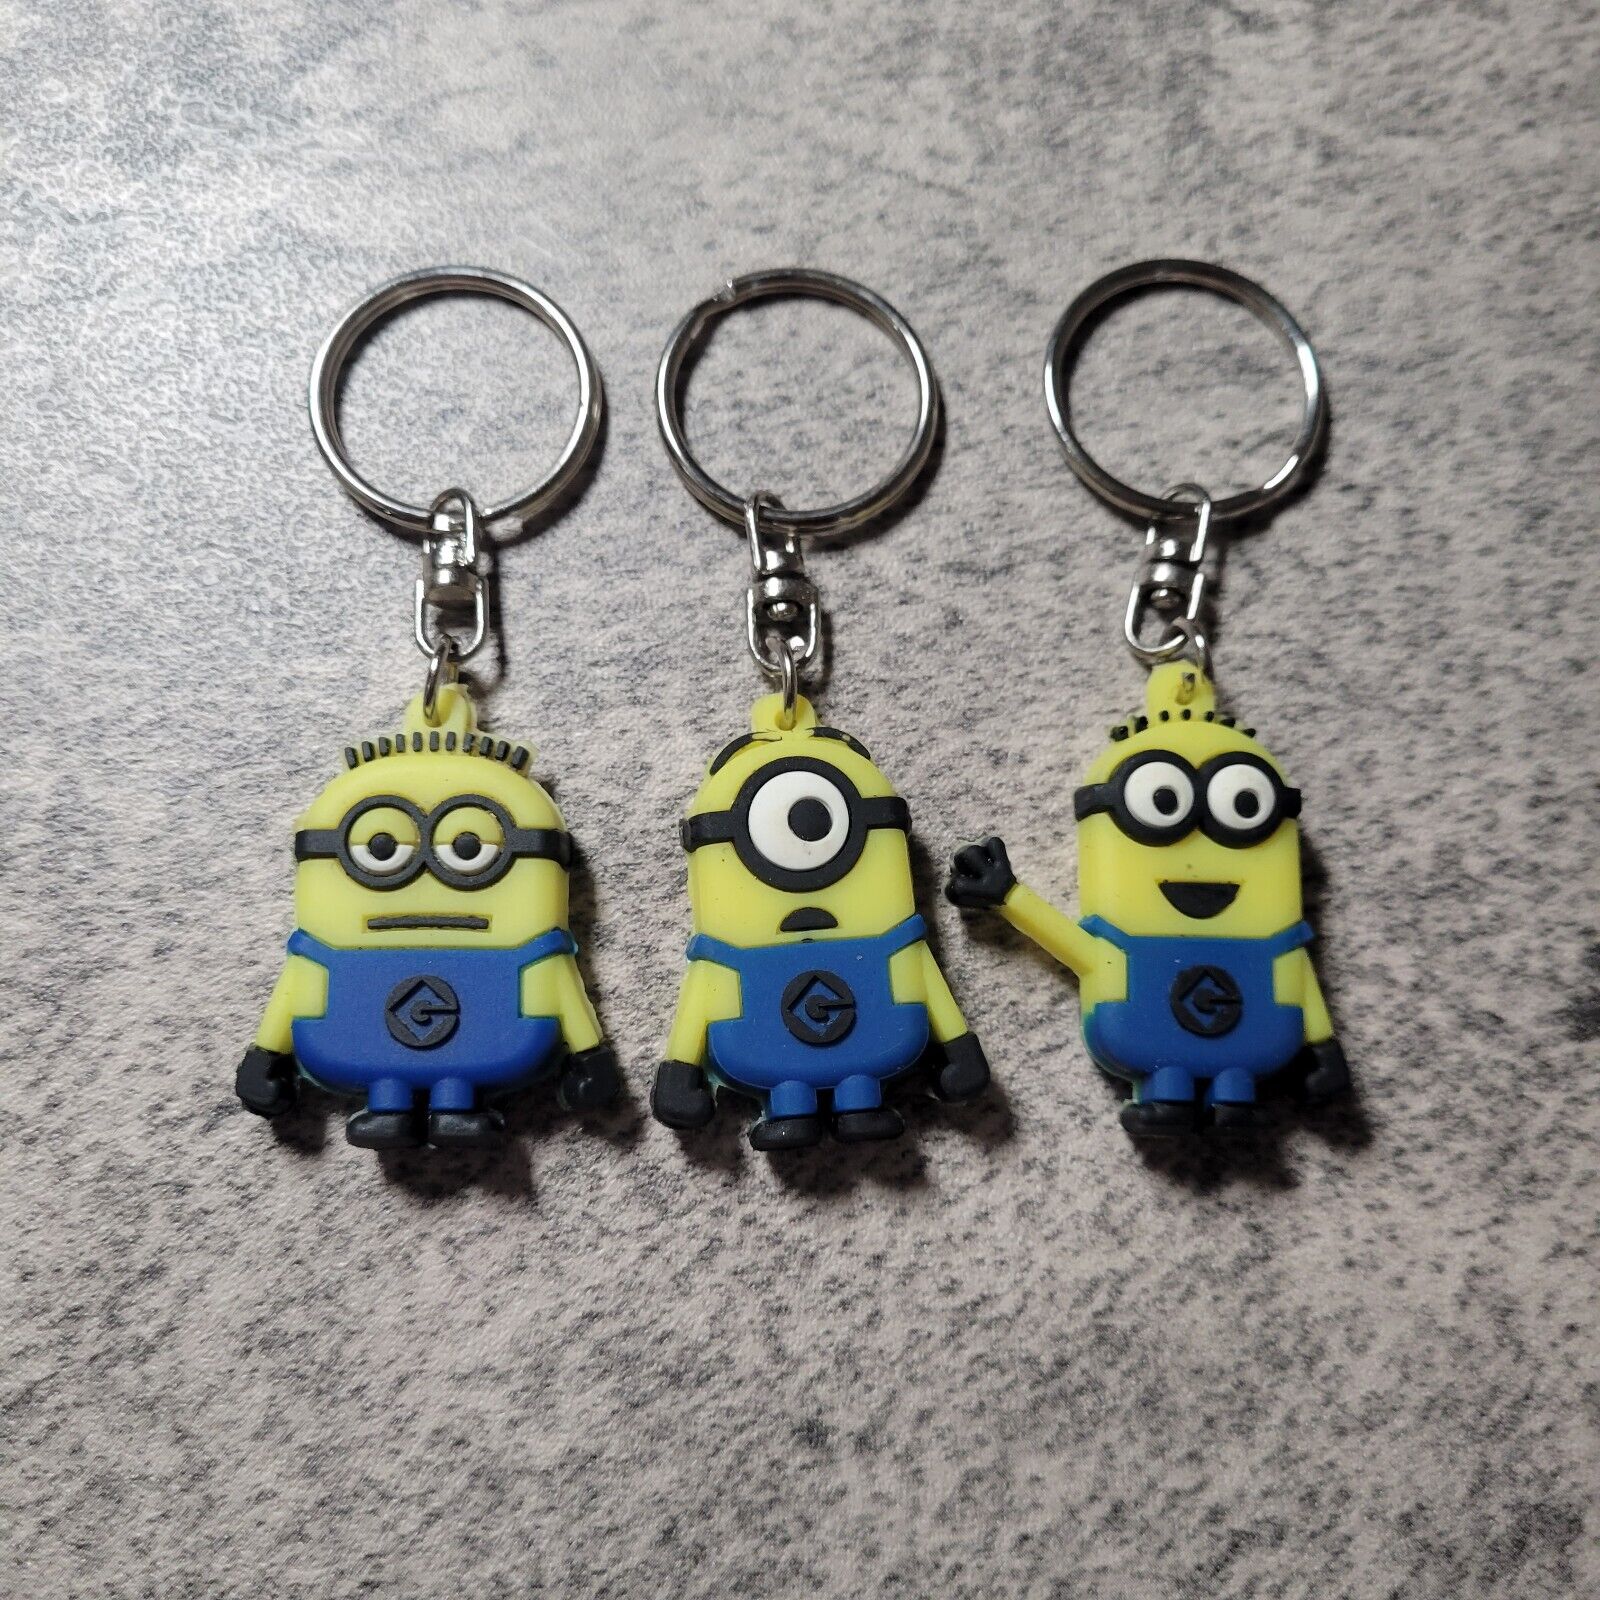 New Minions Despicable Me Keychains Key Ring Set of 3 Kevin Stuart 